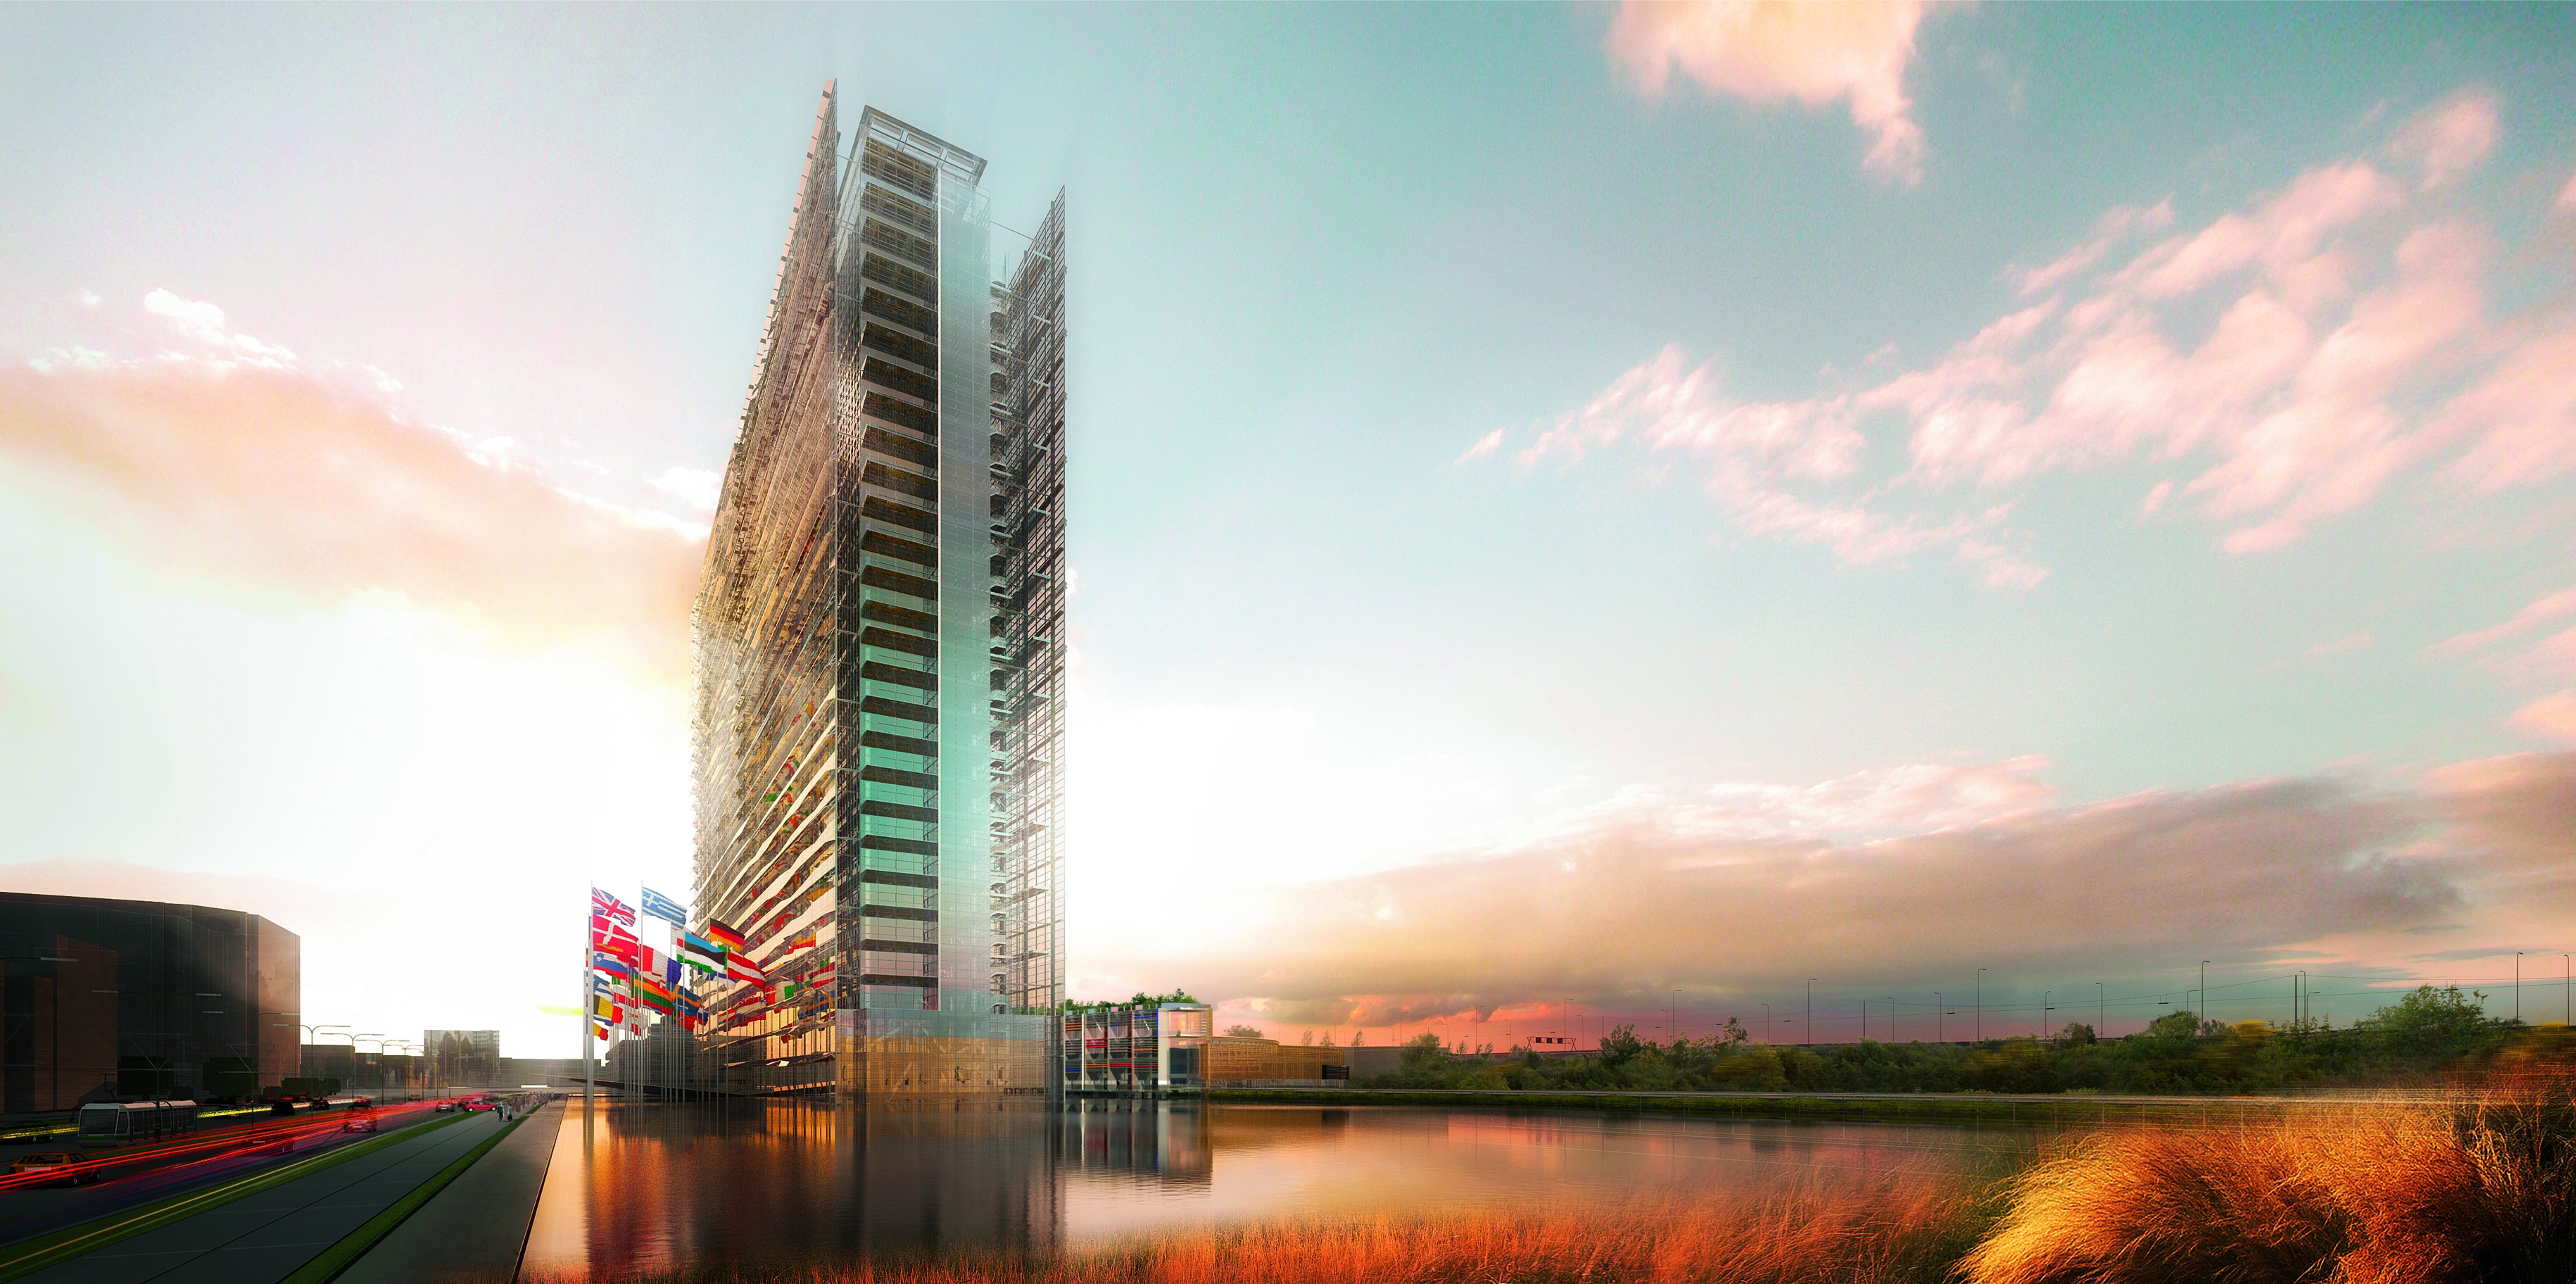 All renderings courtesy Ateliers Jean Nouvel, Dam & Partners, and EPO.